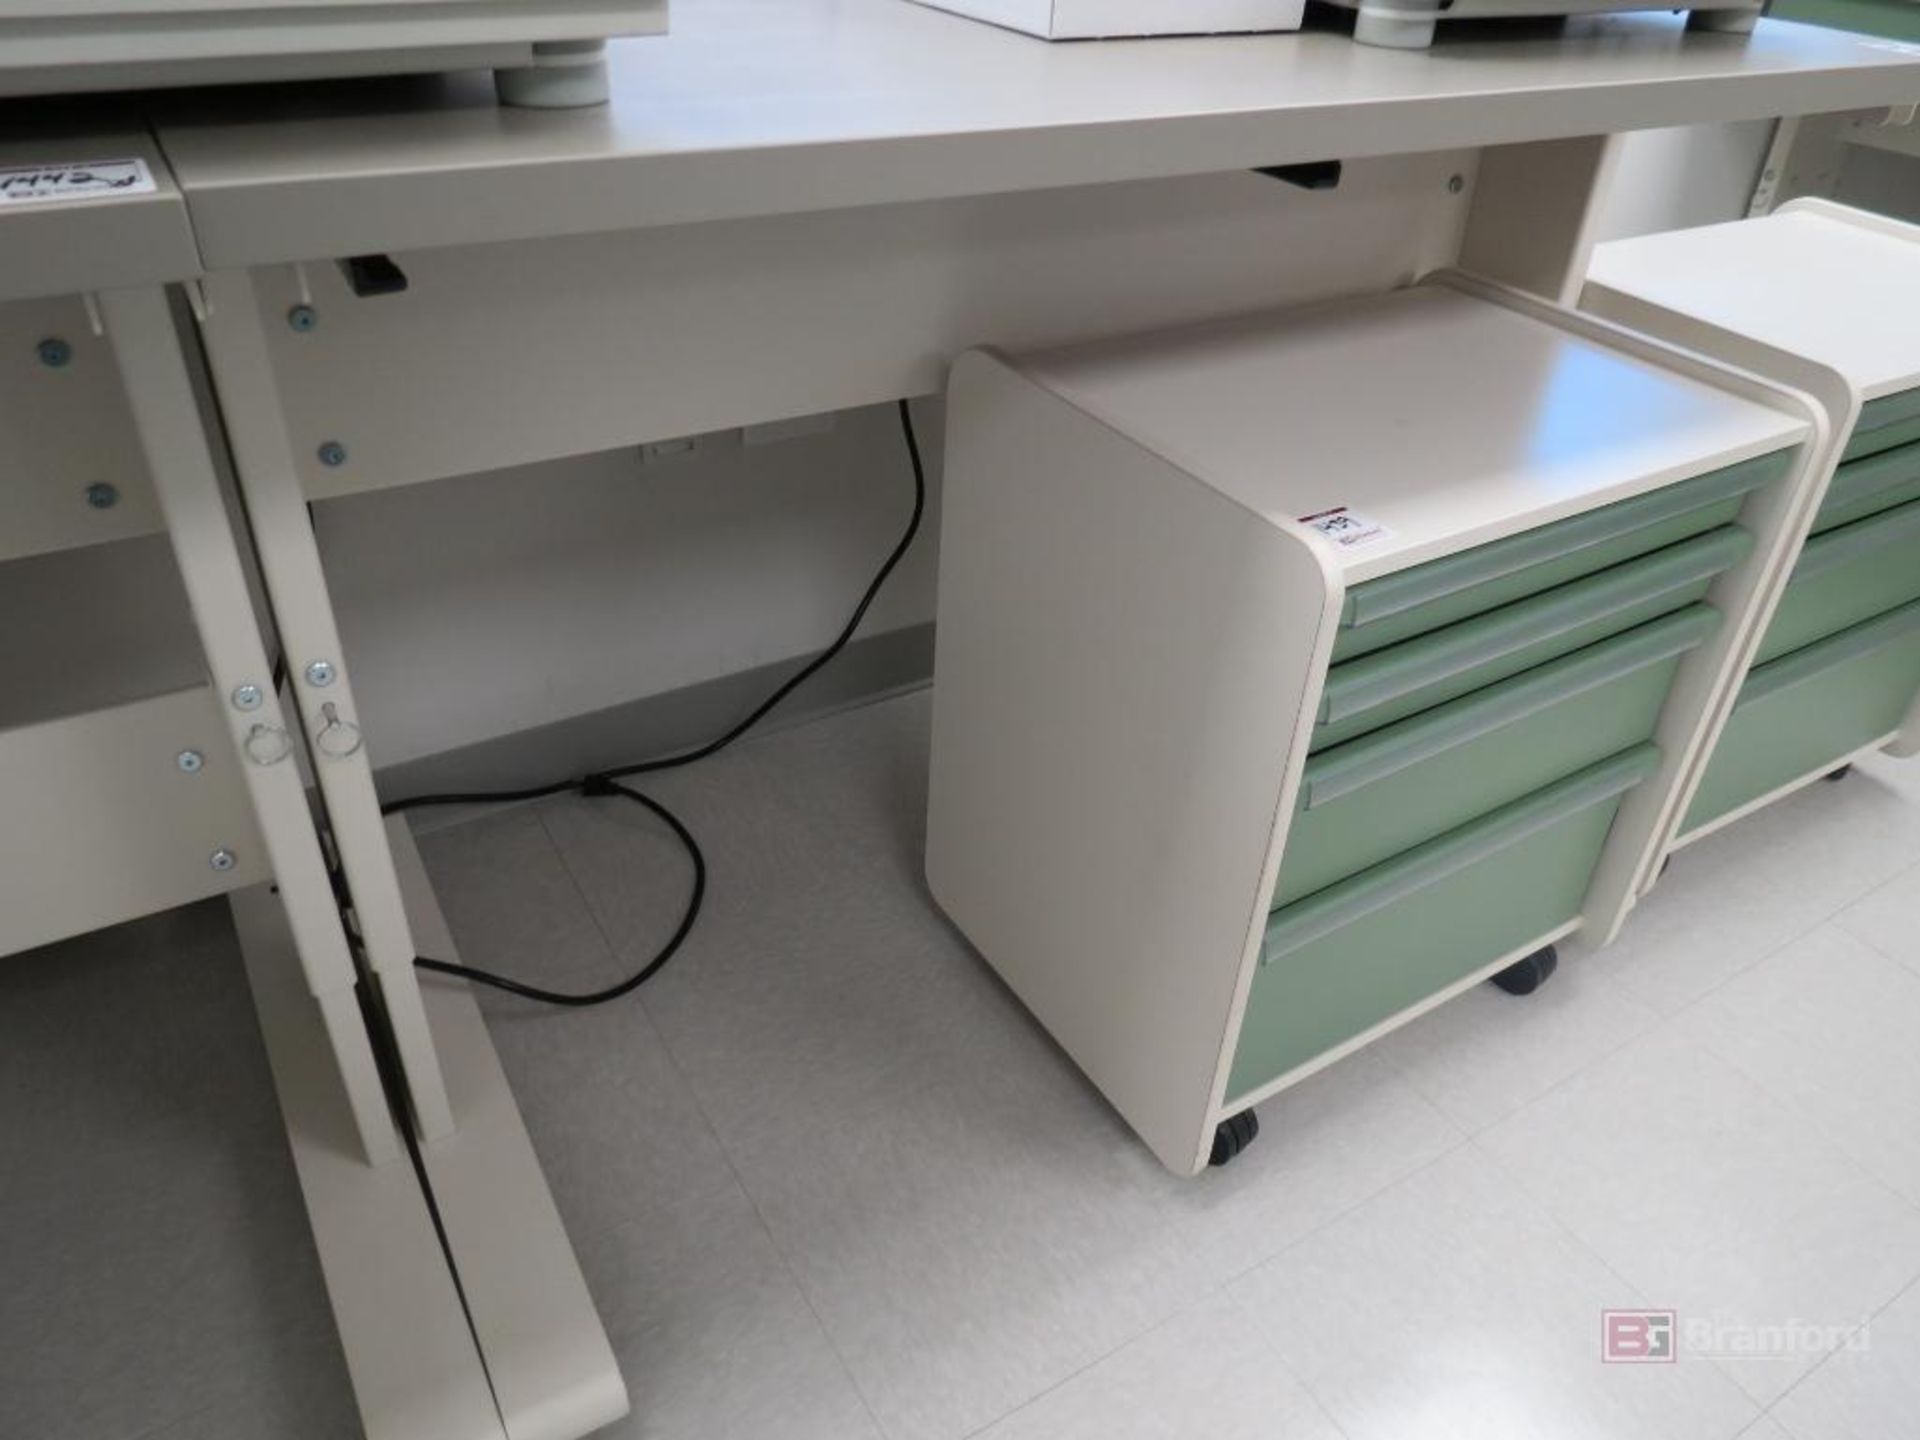 Lot of (3) Herman Miller for Healthcare Lab/Medical Benches - Image 5 of 5